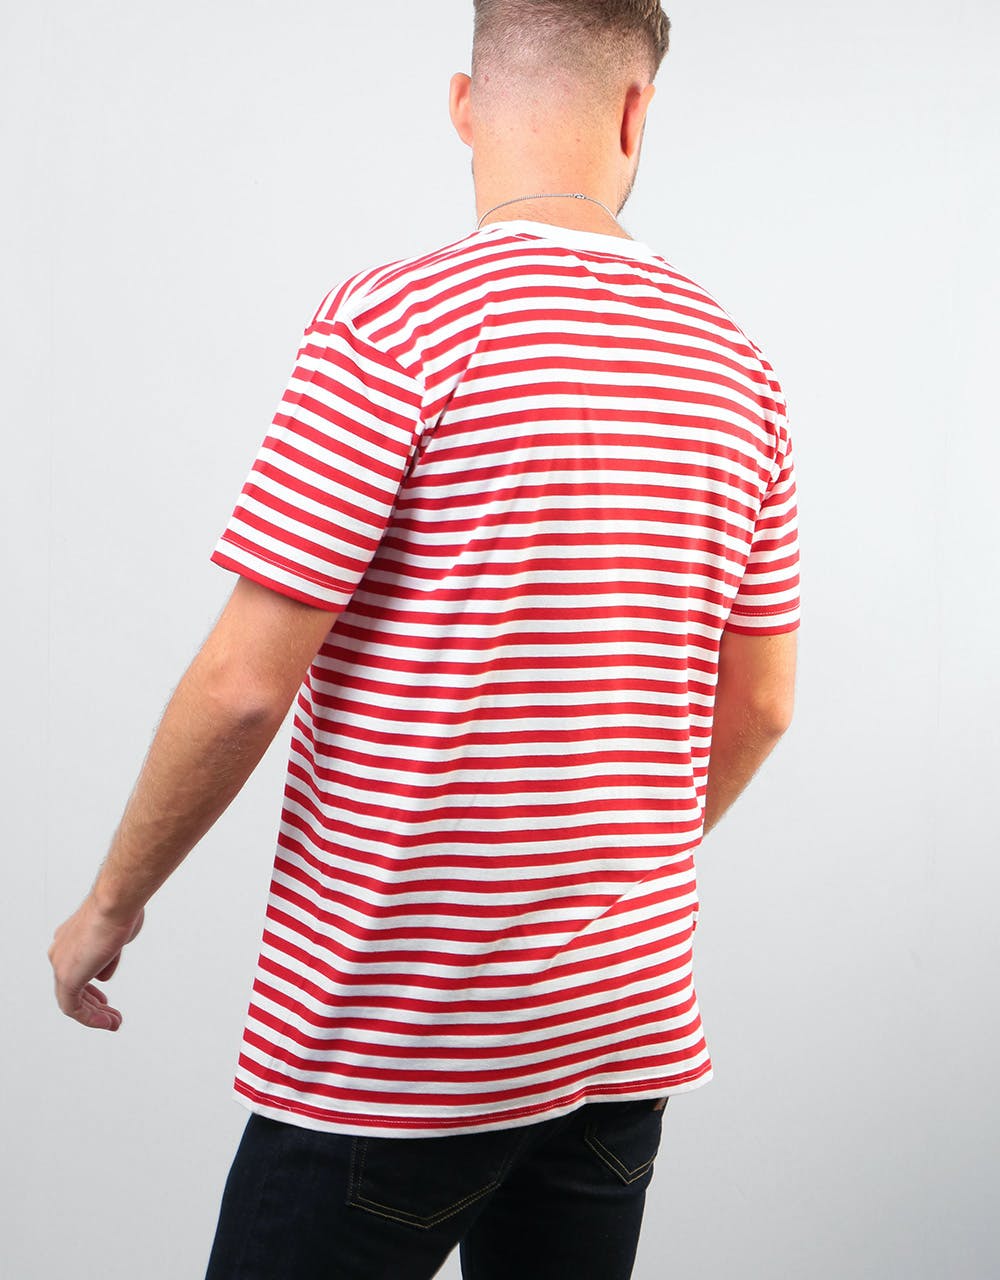 Route One Single Stripe T-Shirt - White/Red